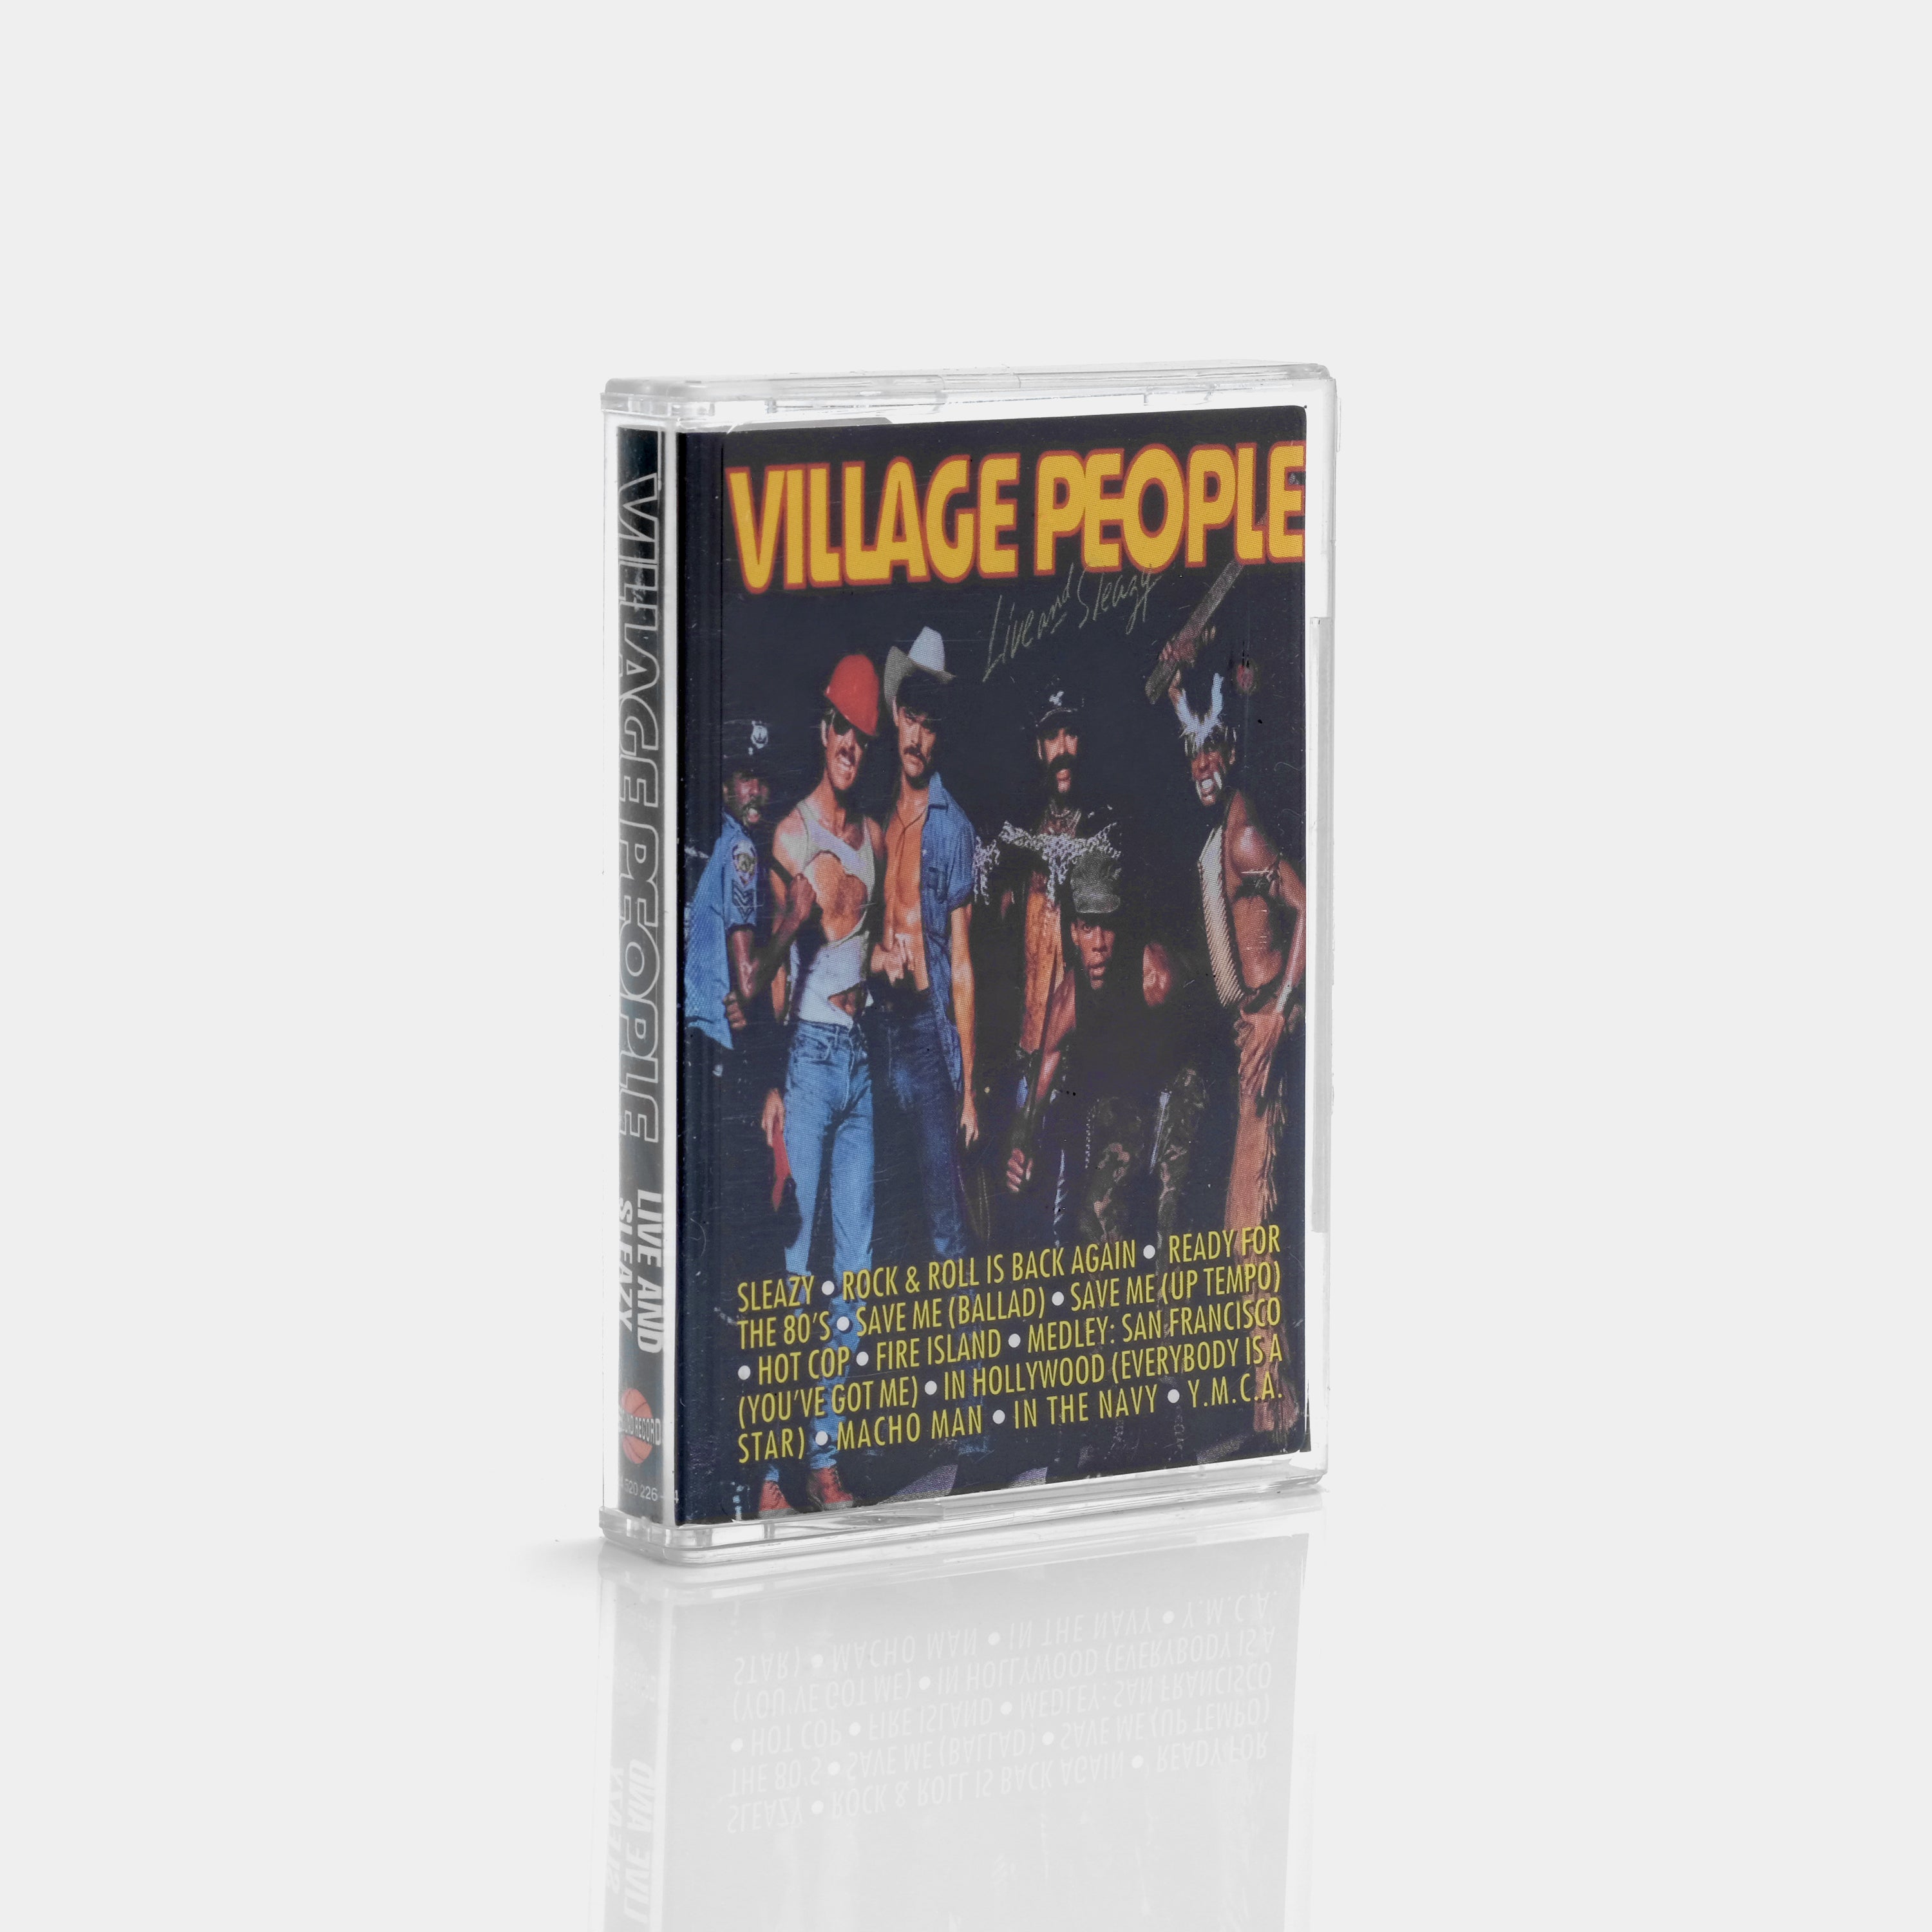 Village People - Live And Sleazy Cassette Tape